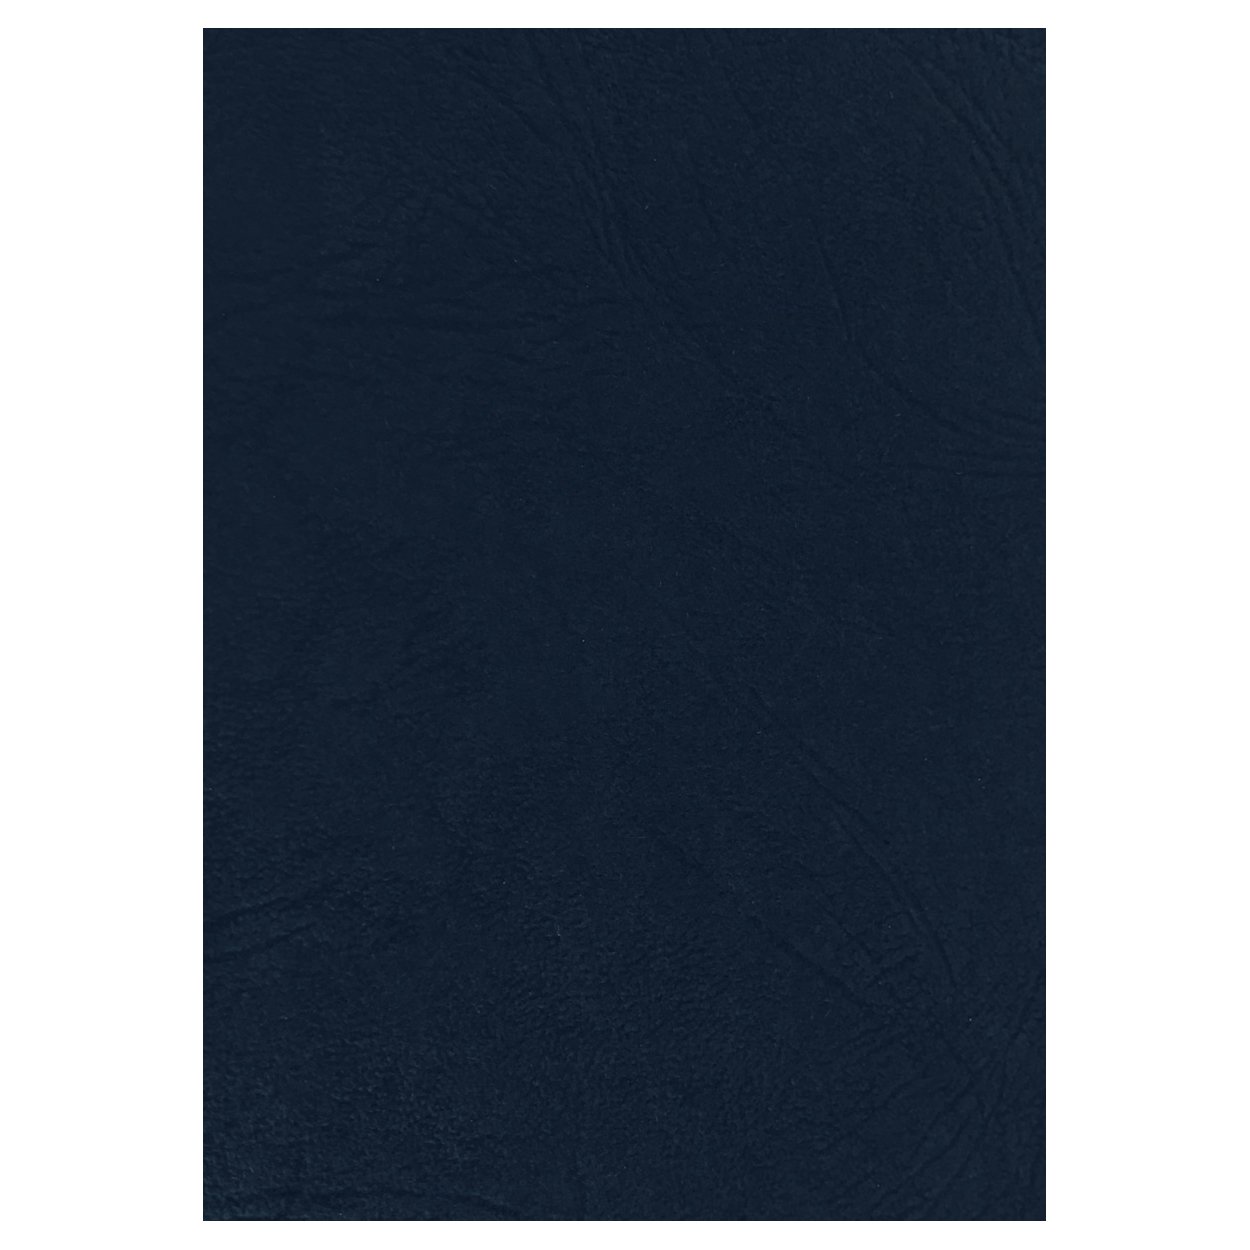 A4 Leathergrain Covers 300gsm - Navy (Pkt 100) - Click Image to Close